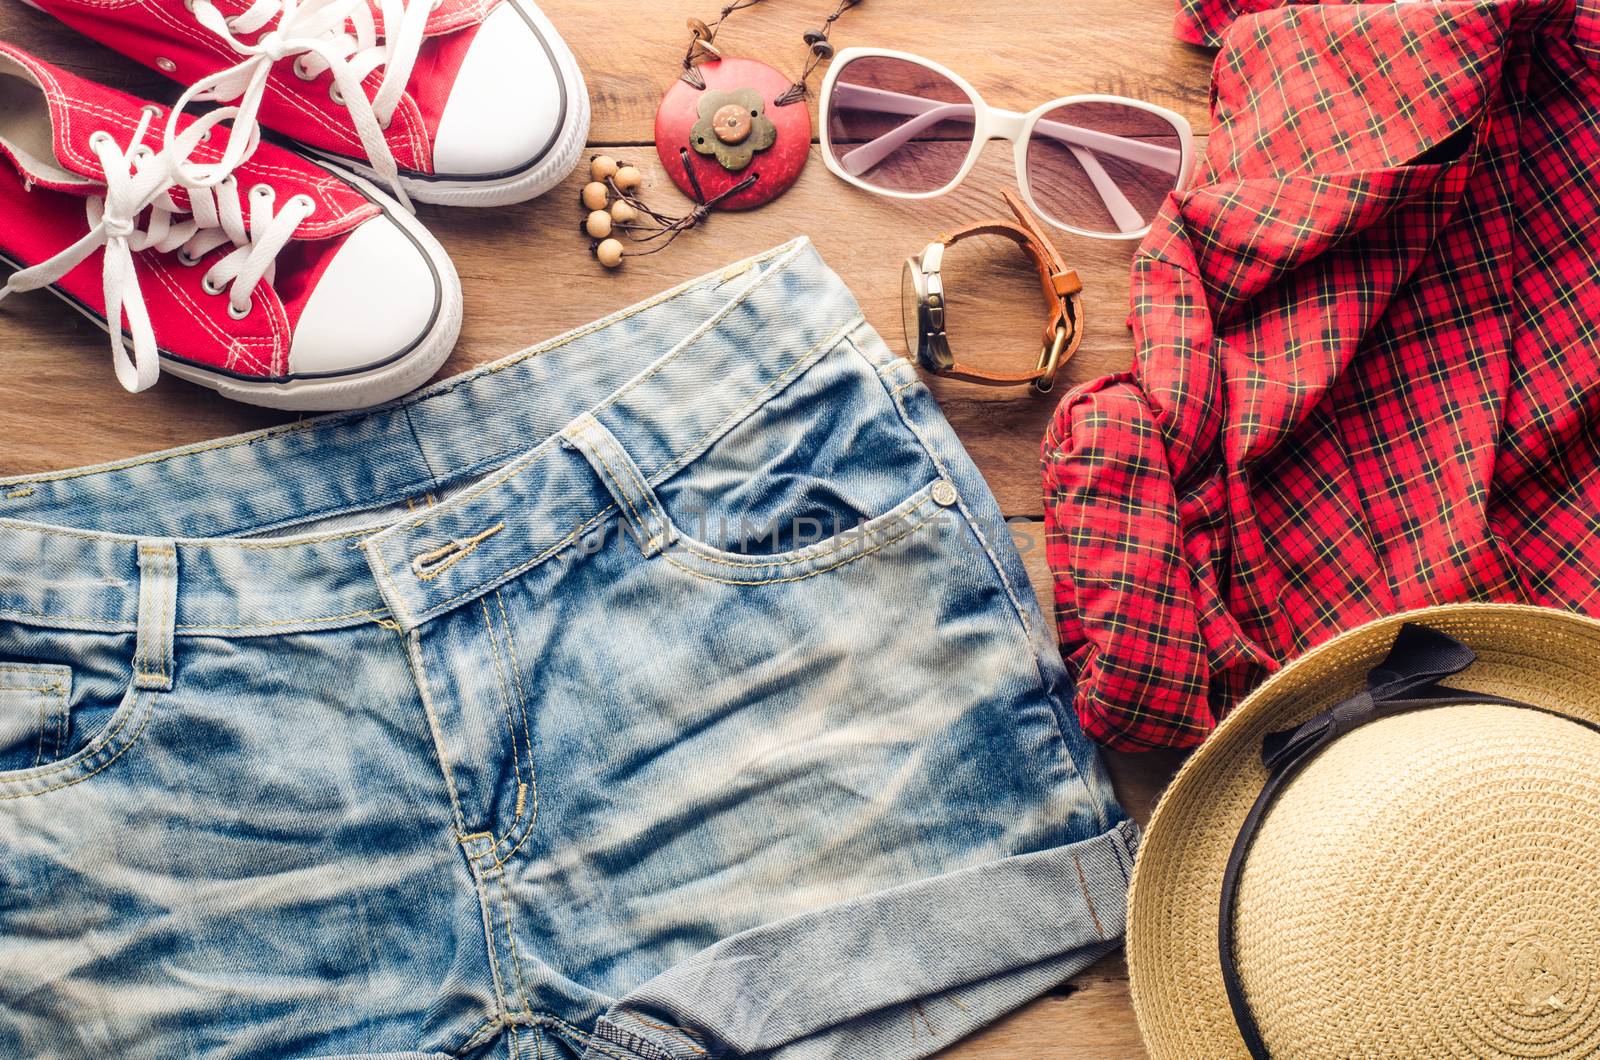 Clothing and accessories for women with summer on wood floor